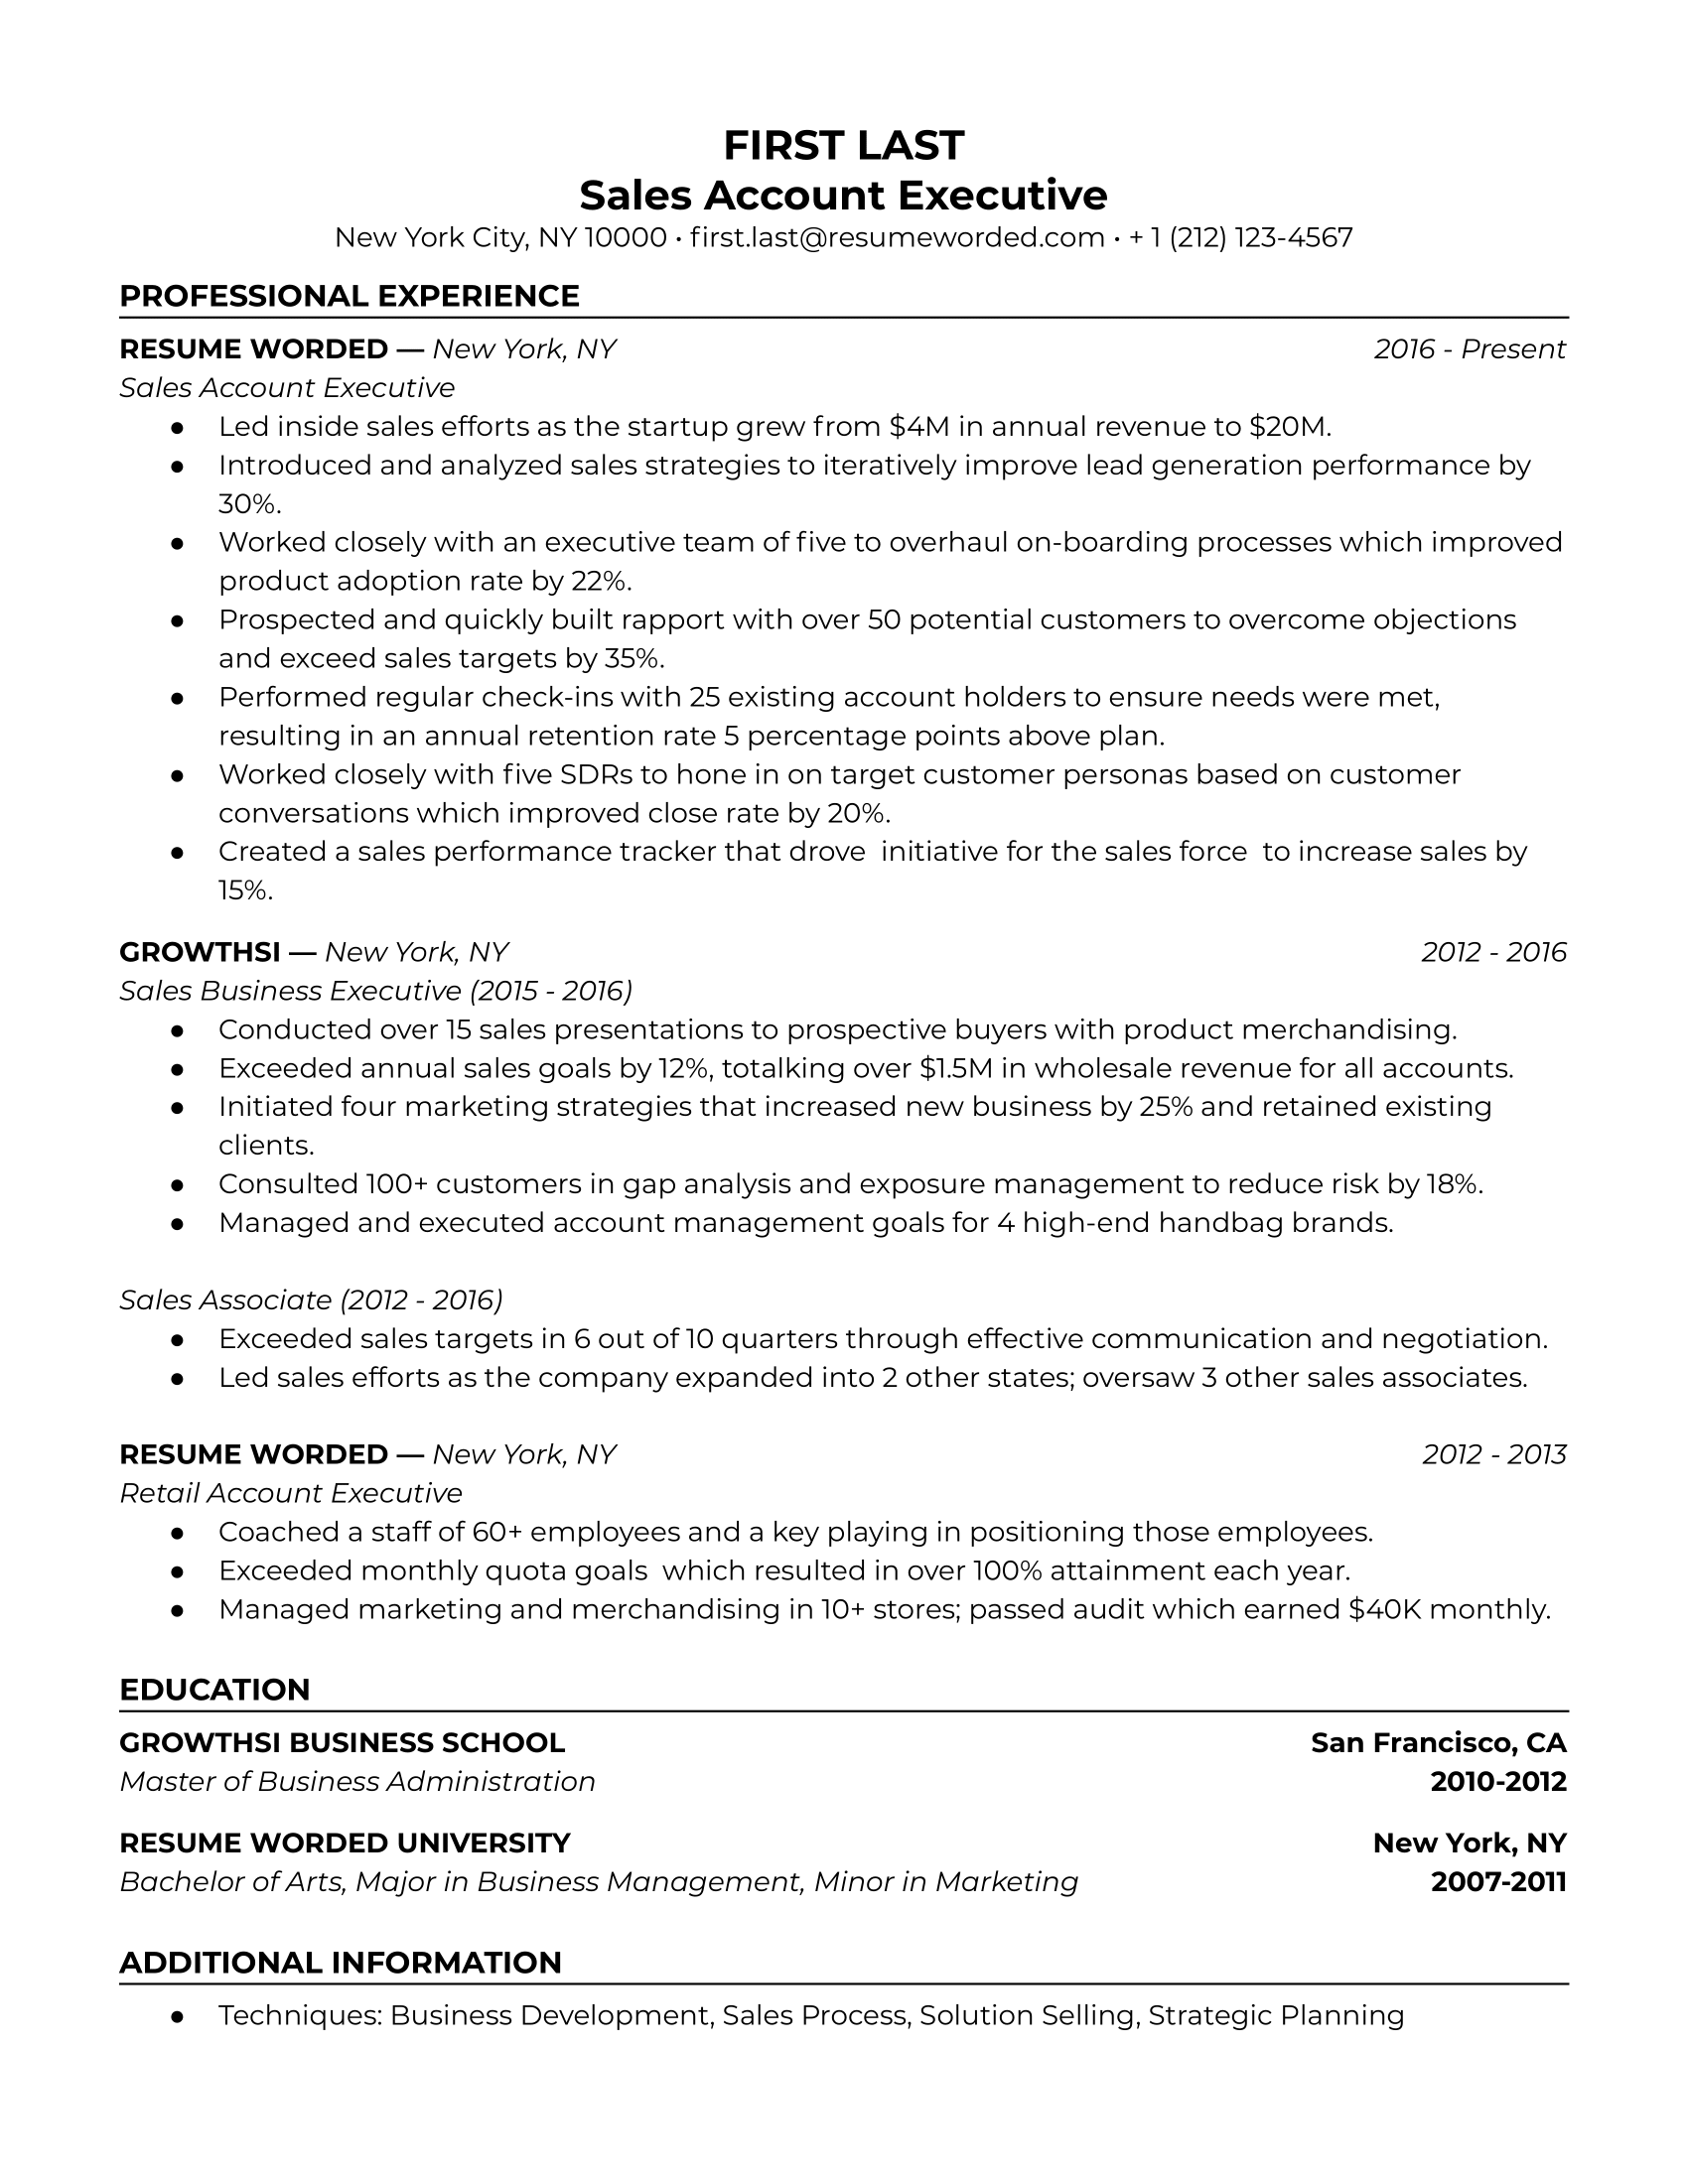 Sales account executive resume sample template with a strong focus on sales and marketing